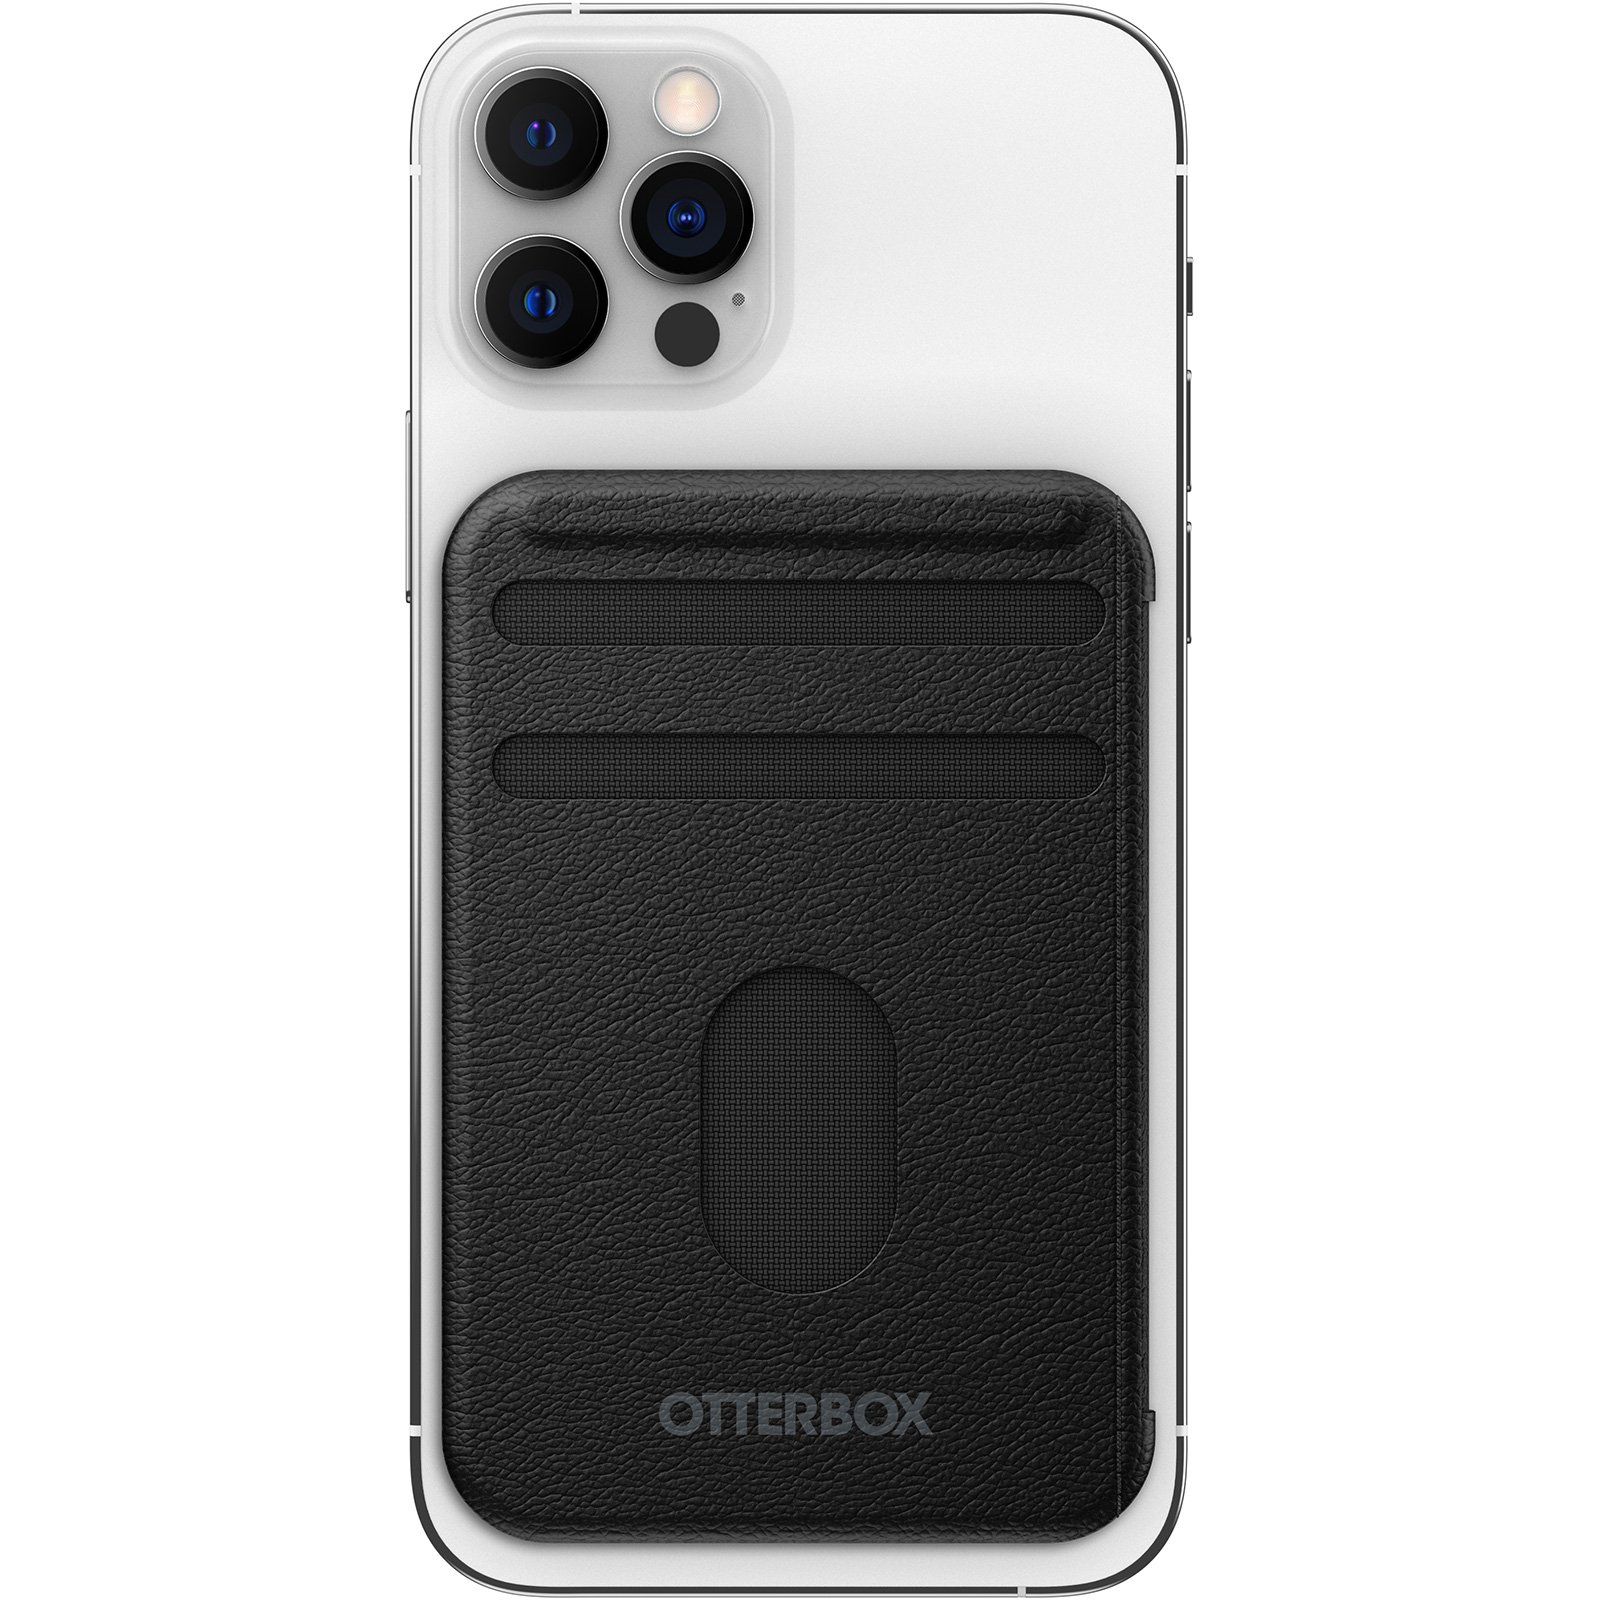 https://www.otterbox.com/on/demandware.static/-/Sites-masterCatalog/default/dw0da5faae/productimages/dis/accessories/magsafe-wallet/magsafe-wallet-ty-2.jpg